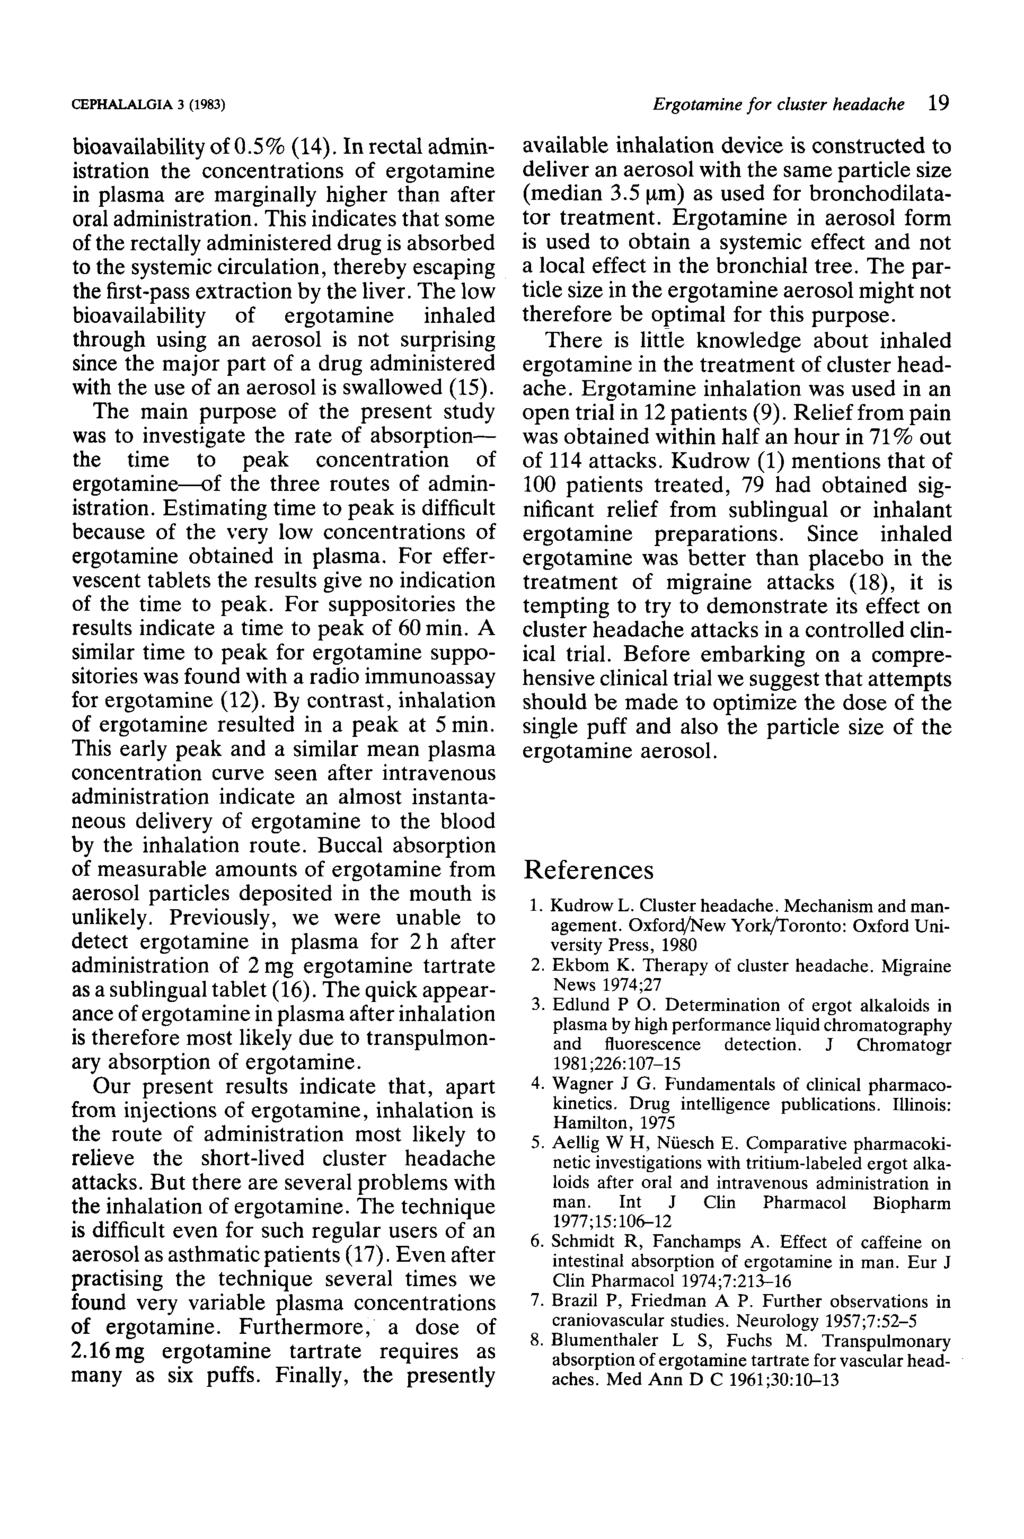 CEPHALALGIA 3 (1983) bioavailability of 0.5% (14). In rectal administration the concentrations of ergotamine in plasma are marginally higher than after oral administration.